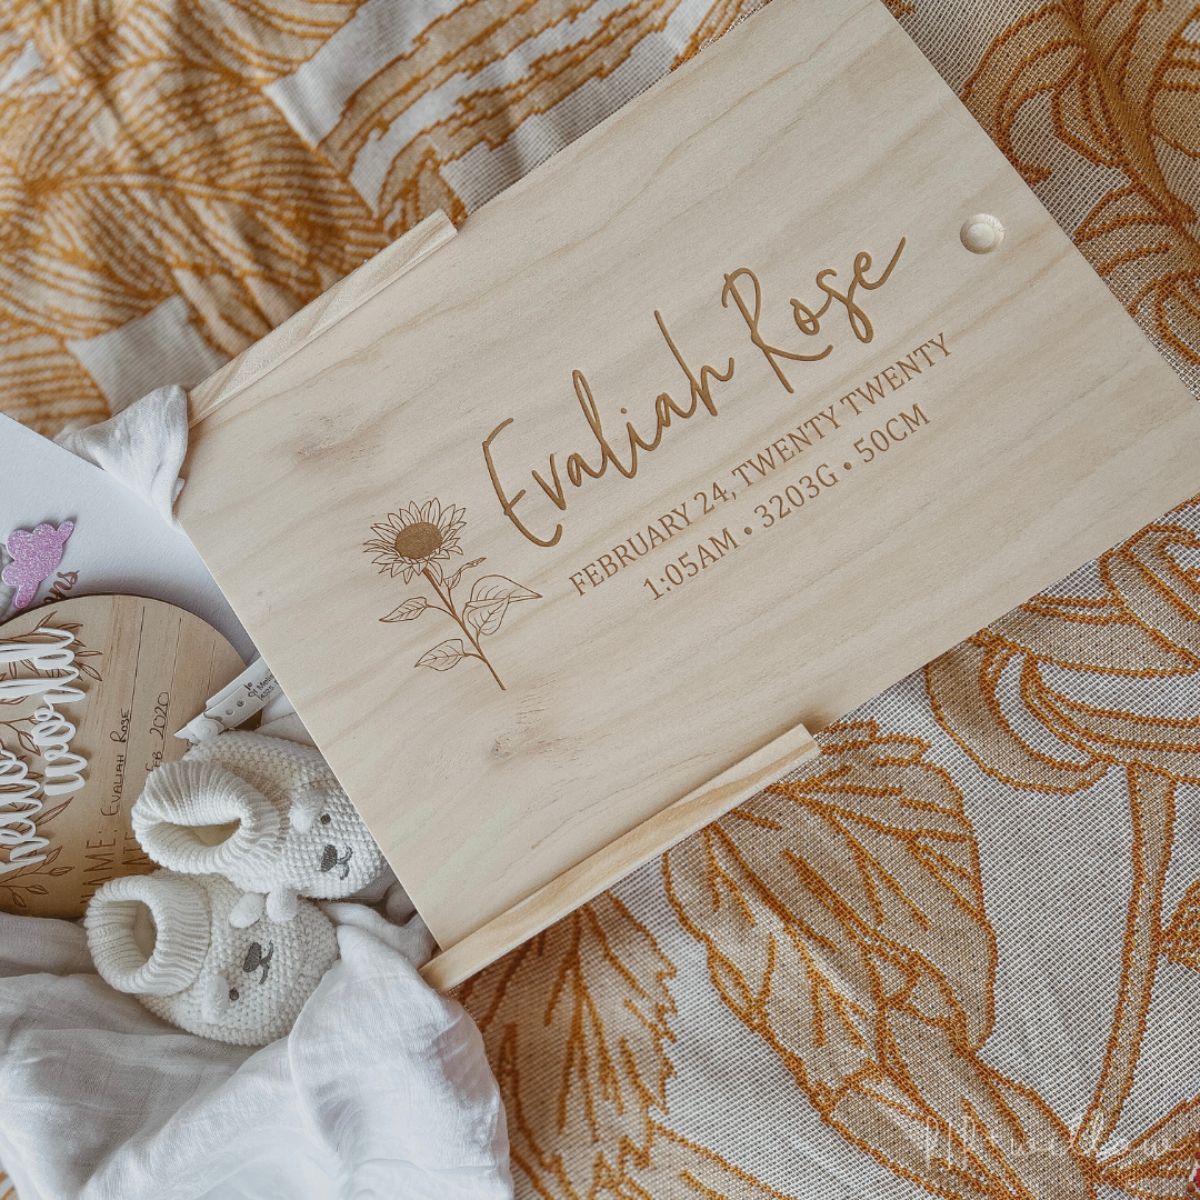 This is a large wooden baby keepsake box with a sunflower design